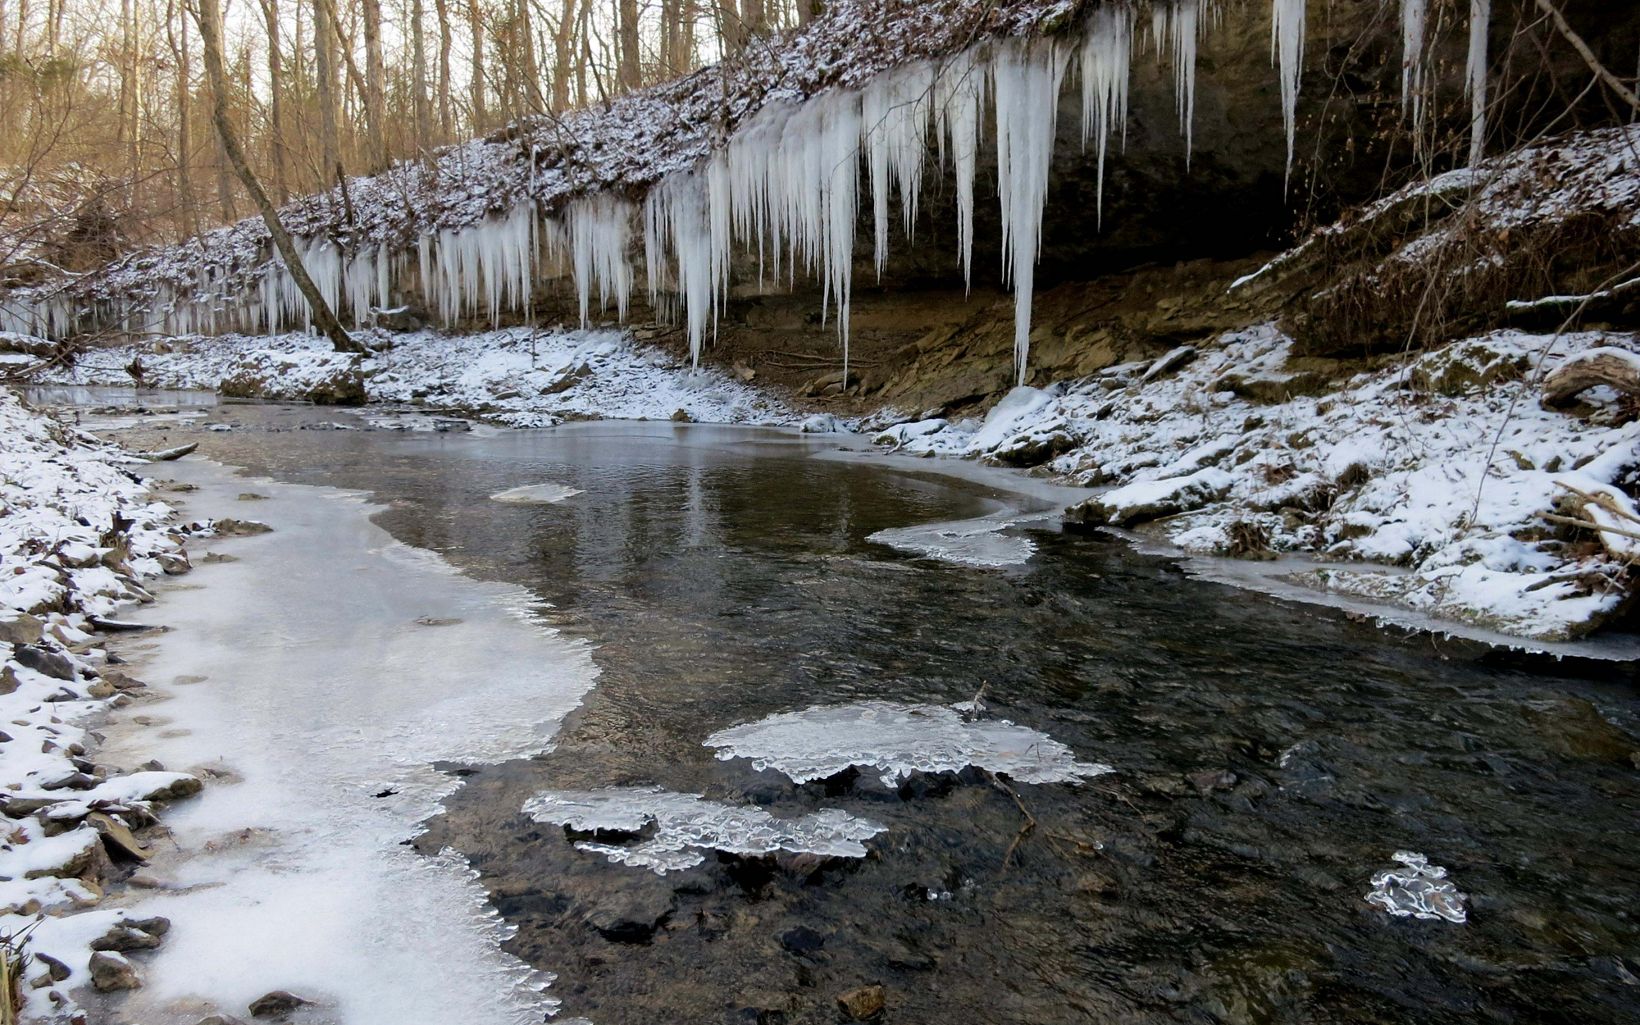 Winter in Ohio Winter is one of the best times to get outside to hike, offering beauty, quiet, and a chance to get some peaceful solitude on less crowded trails. © Terry Seidel/TNC